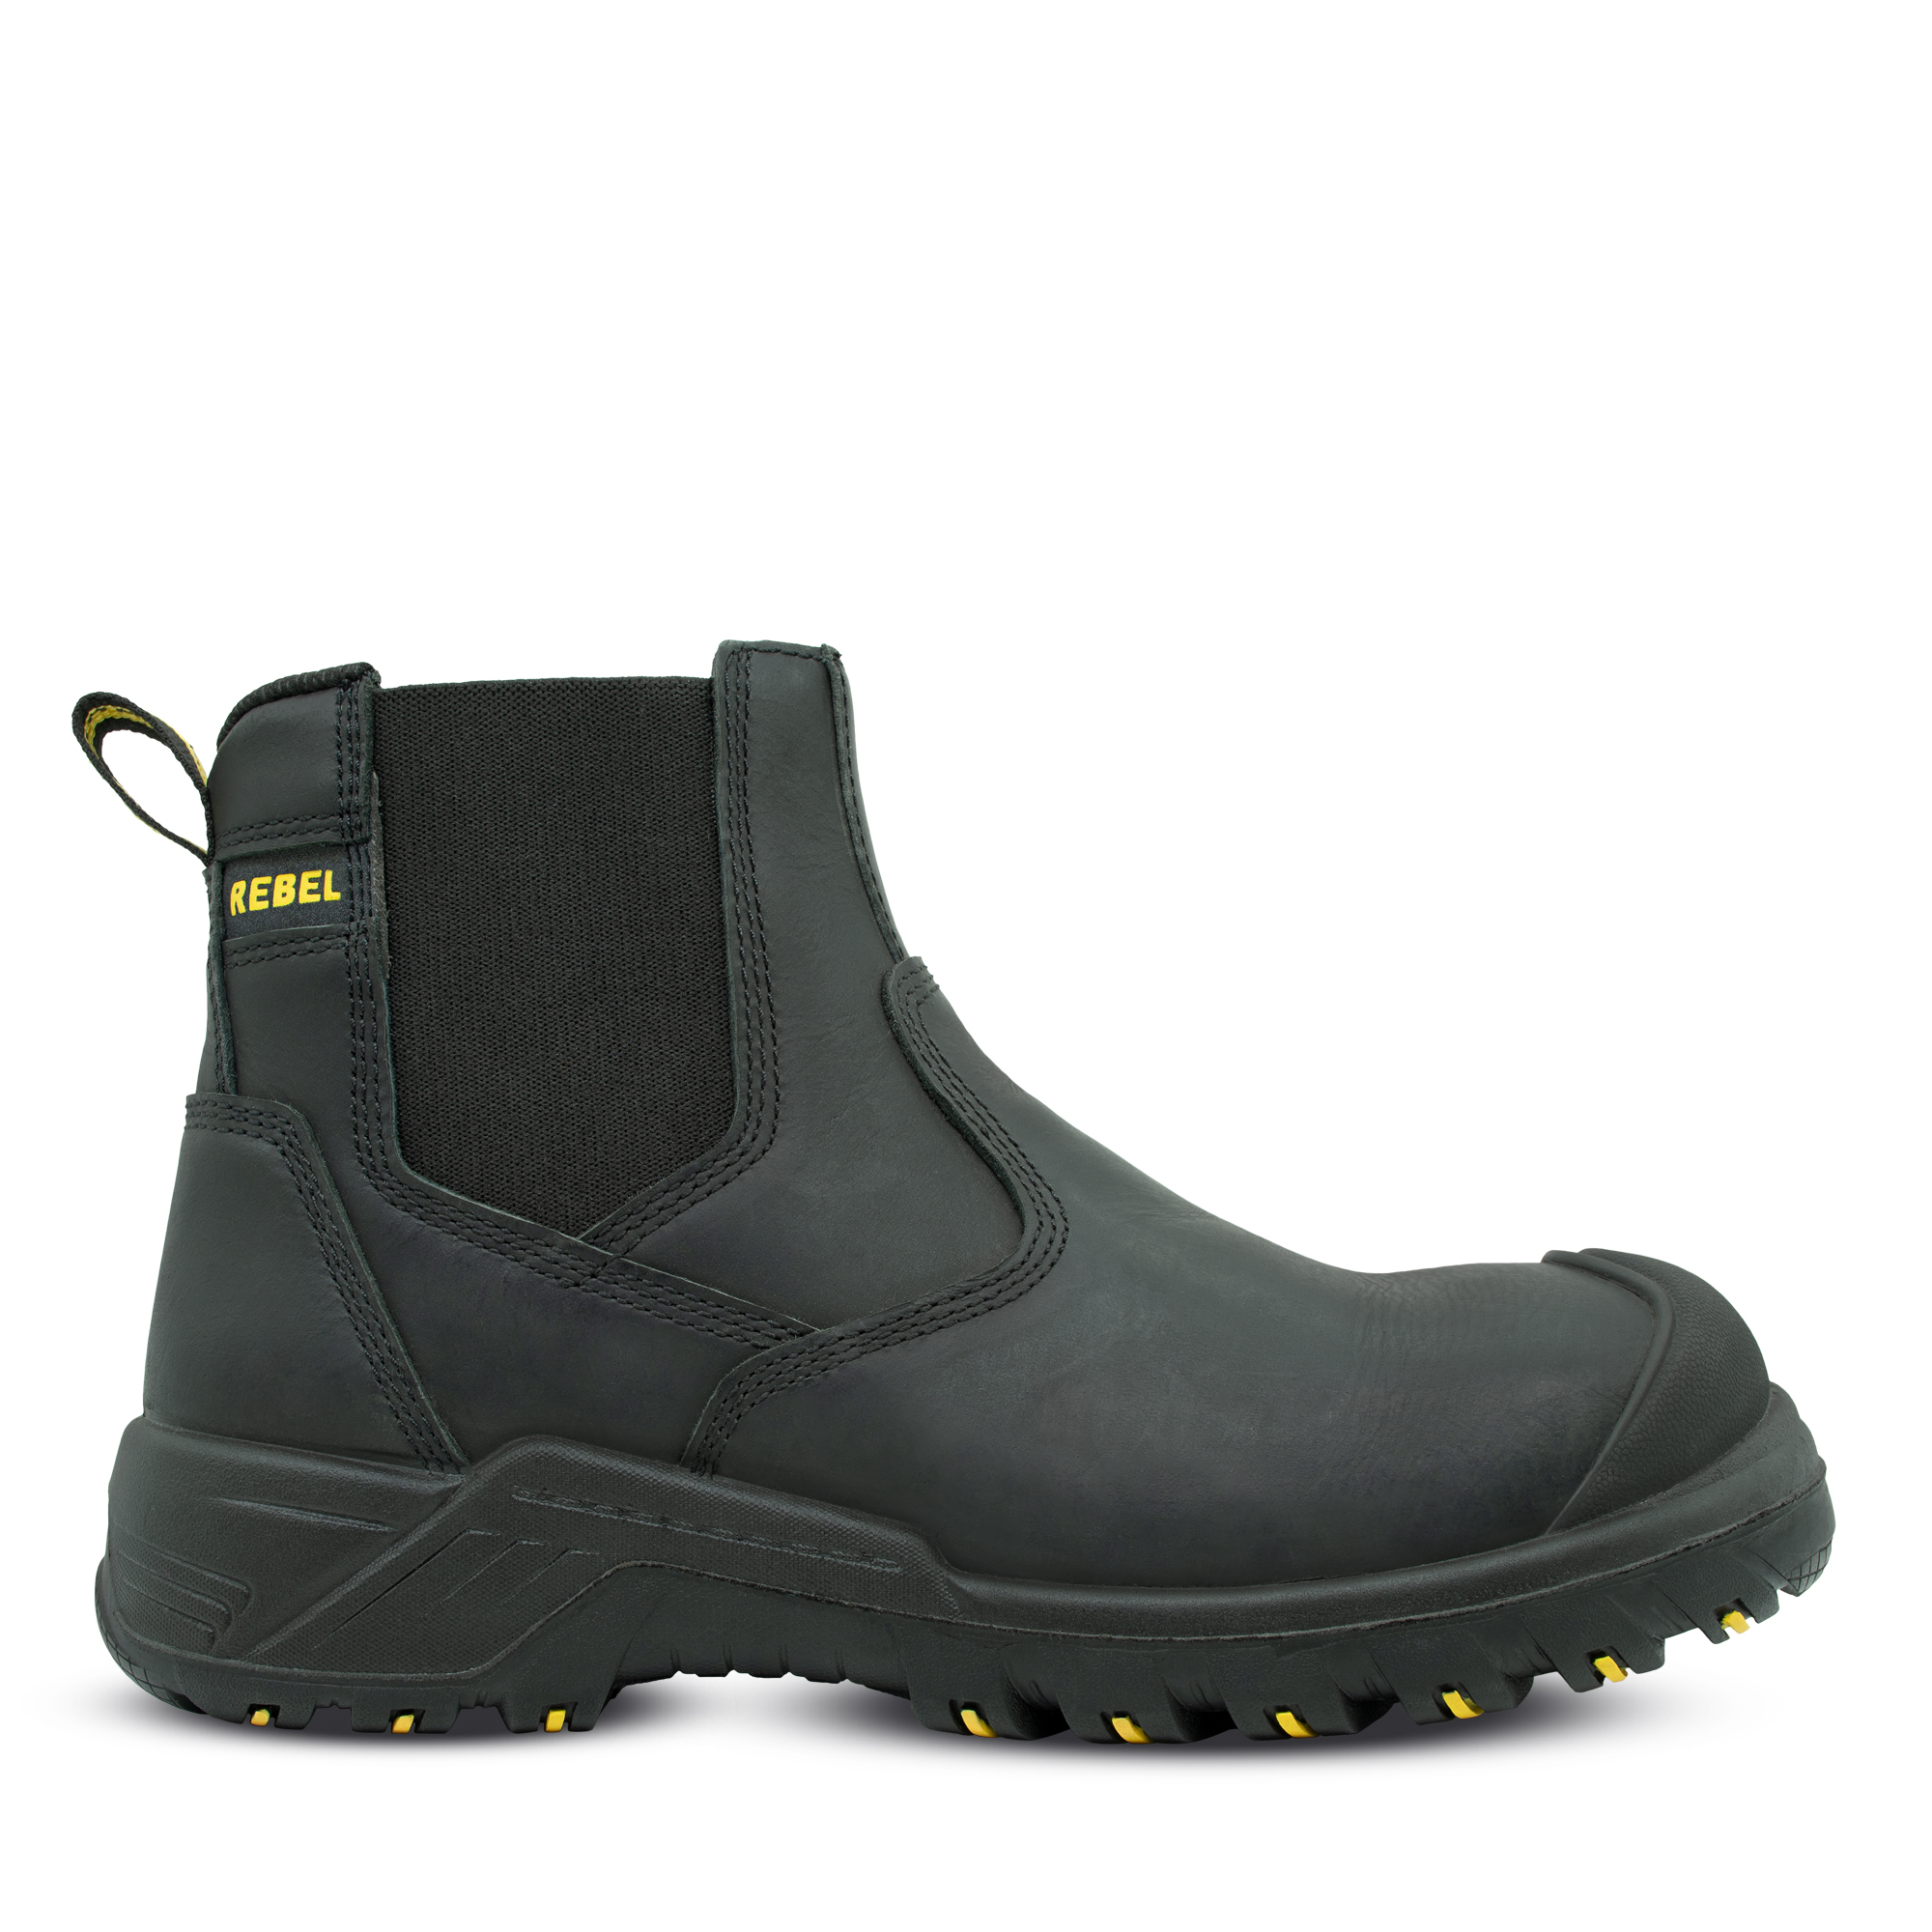 Buy > rebel lo top safety shoe > in stock